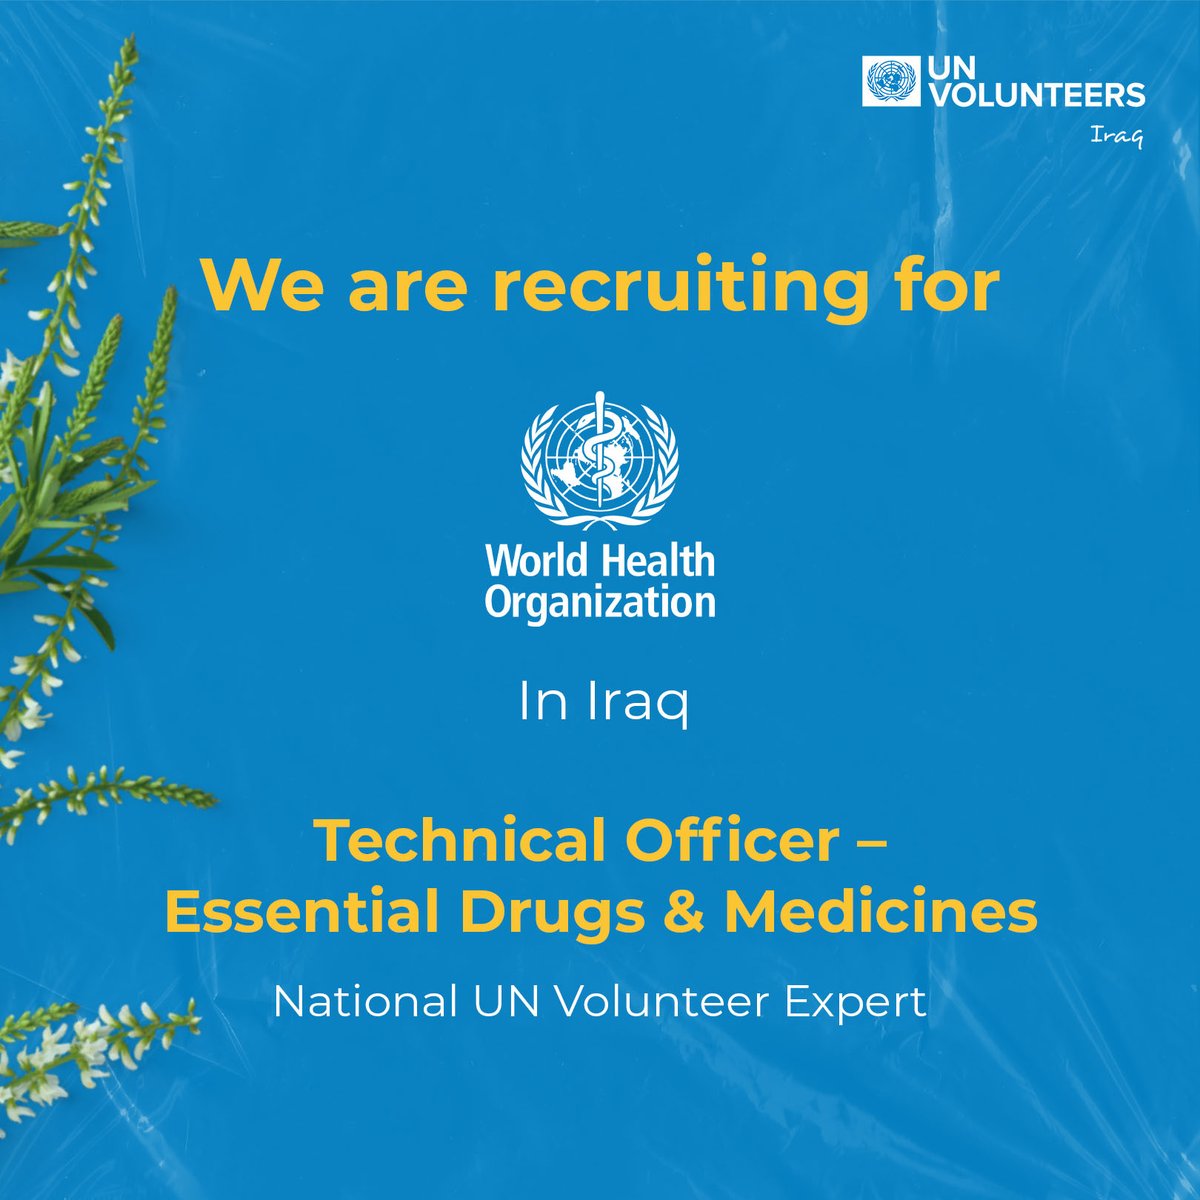 Are you an expert with 15 years of experience? @WHOIraq is recruiting a UN Volunteer to serve as a Technical Officer - Essential Drugs and Medicines. Check the requirements and apply: bit.ly/4cEDNB7